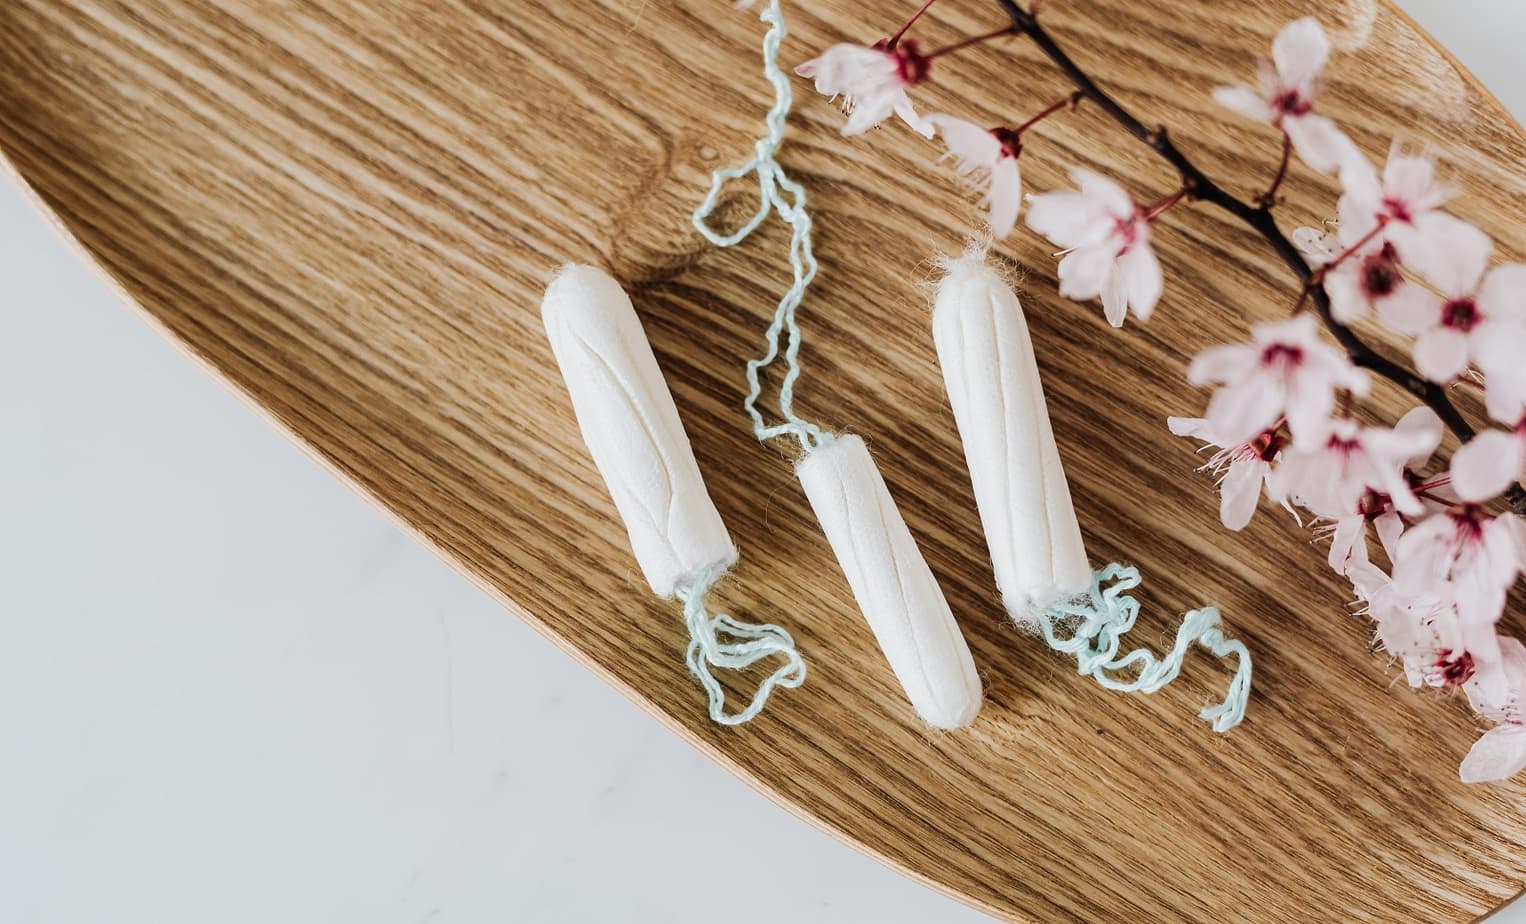 Everything you want to know about tampons, but are embarrassed to ask